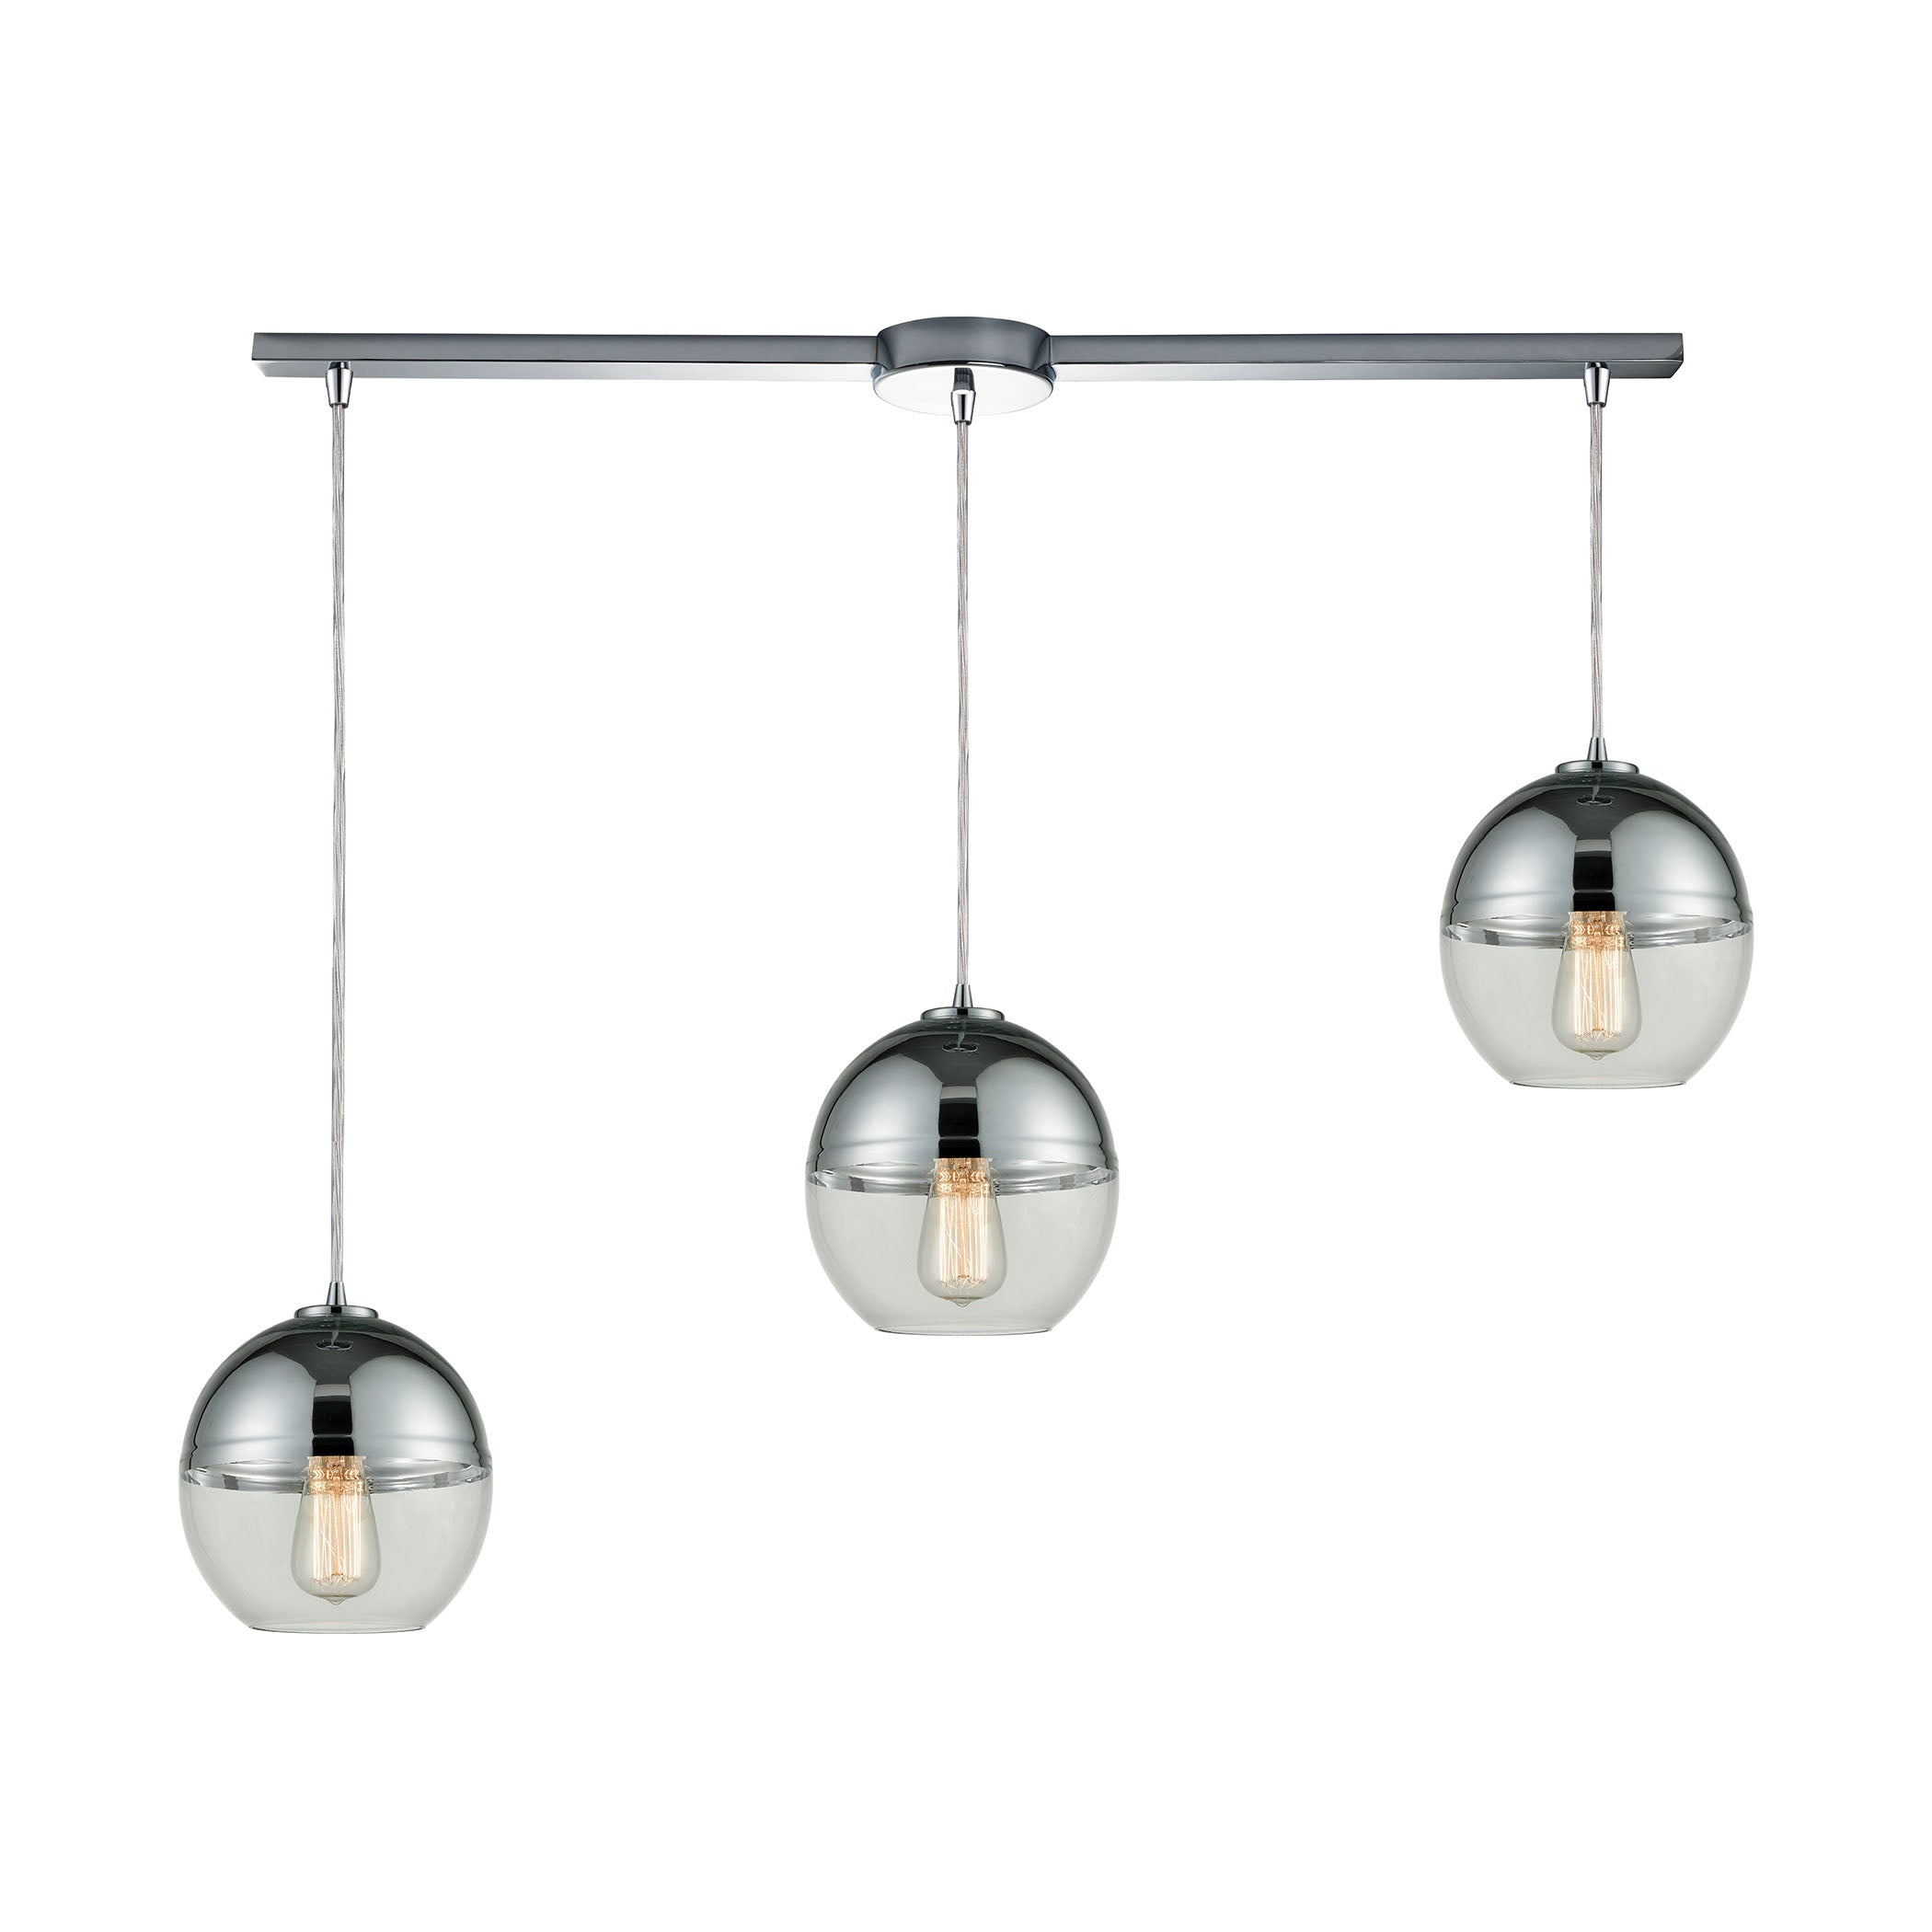 ELK Lighting 10492/3L Revelo 3-Light Linear Mini Pendant Fixture in Polished Chrome with Clear and Chrome-plated Glass